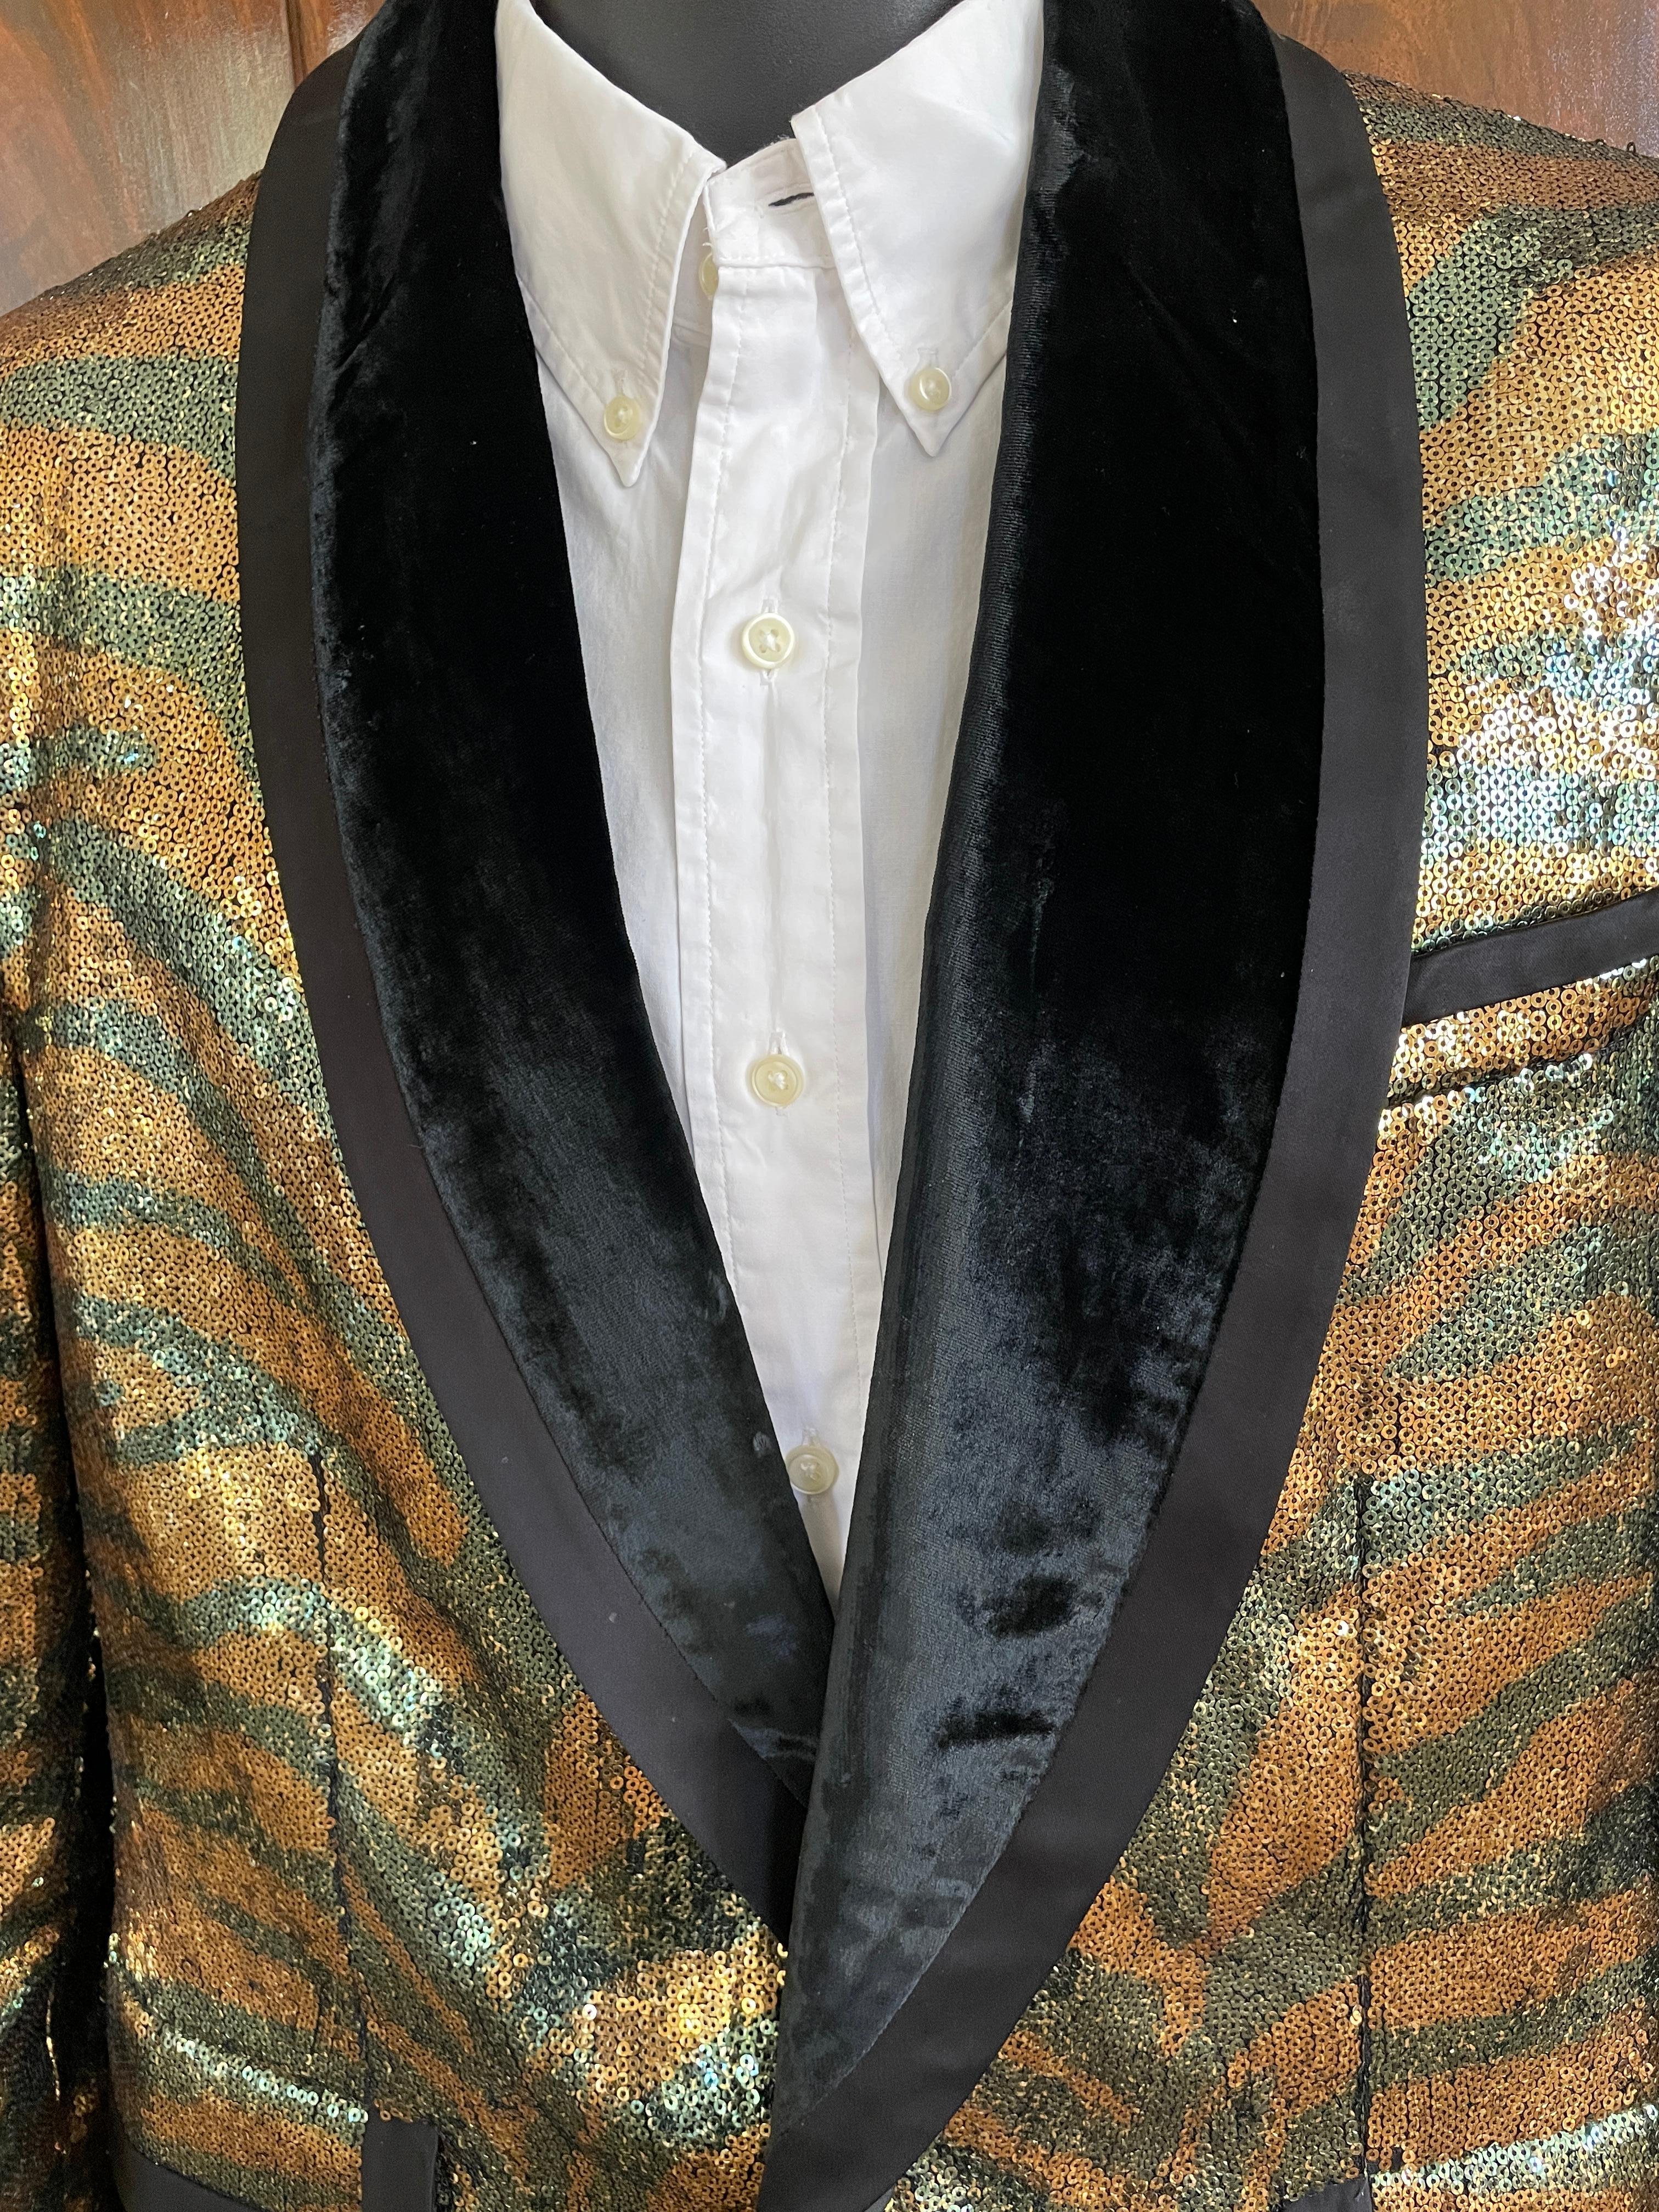 Marc Jacobs Collection Men's Tiger Sequin Evening Jacket with Velvet Shawl Collar.
Tailored in Italy, this has working sleeve buttons.
This is such a magnificent piece, please use the zoom feature to see details.
Size 52 (42)
Chest 44